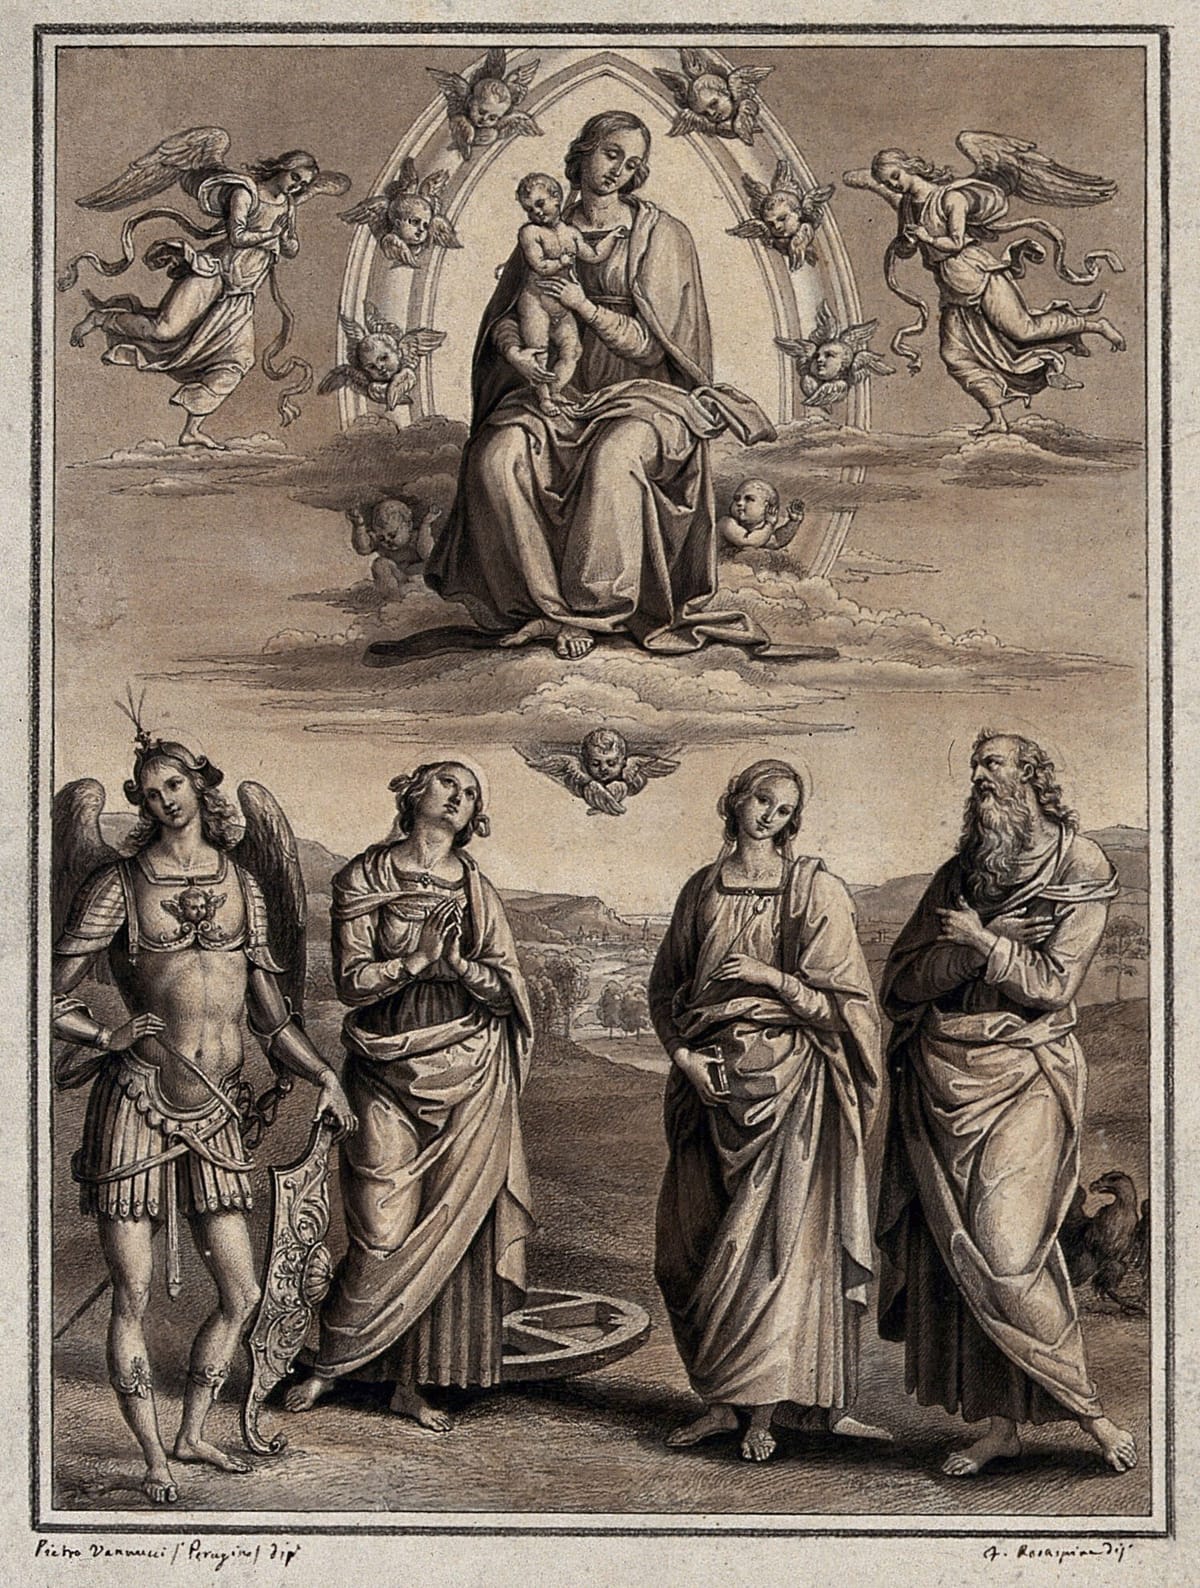 The Virgin with four saints: the archangel Michael, Saint Catherine of Alexandria, Saint Apollonia, and Saint John the Evangelist. (1830) by F. Rosaspina - Public Domain Catholic Drawing